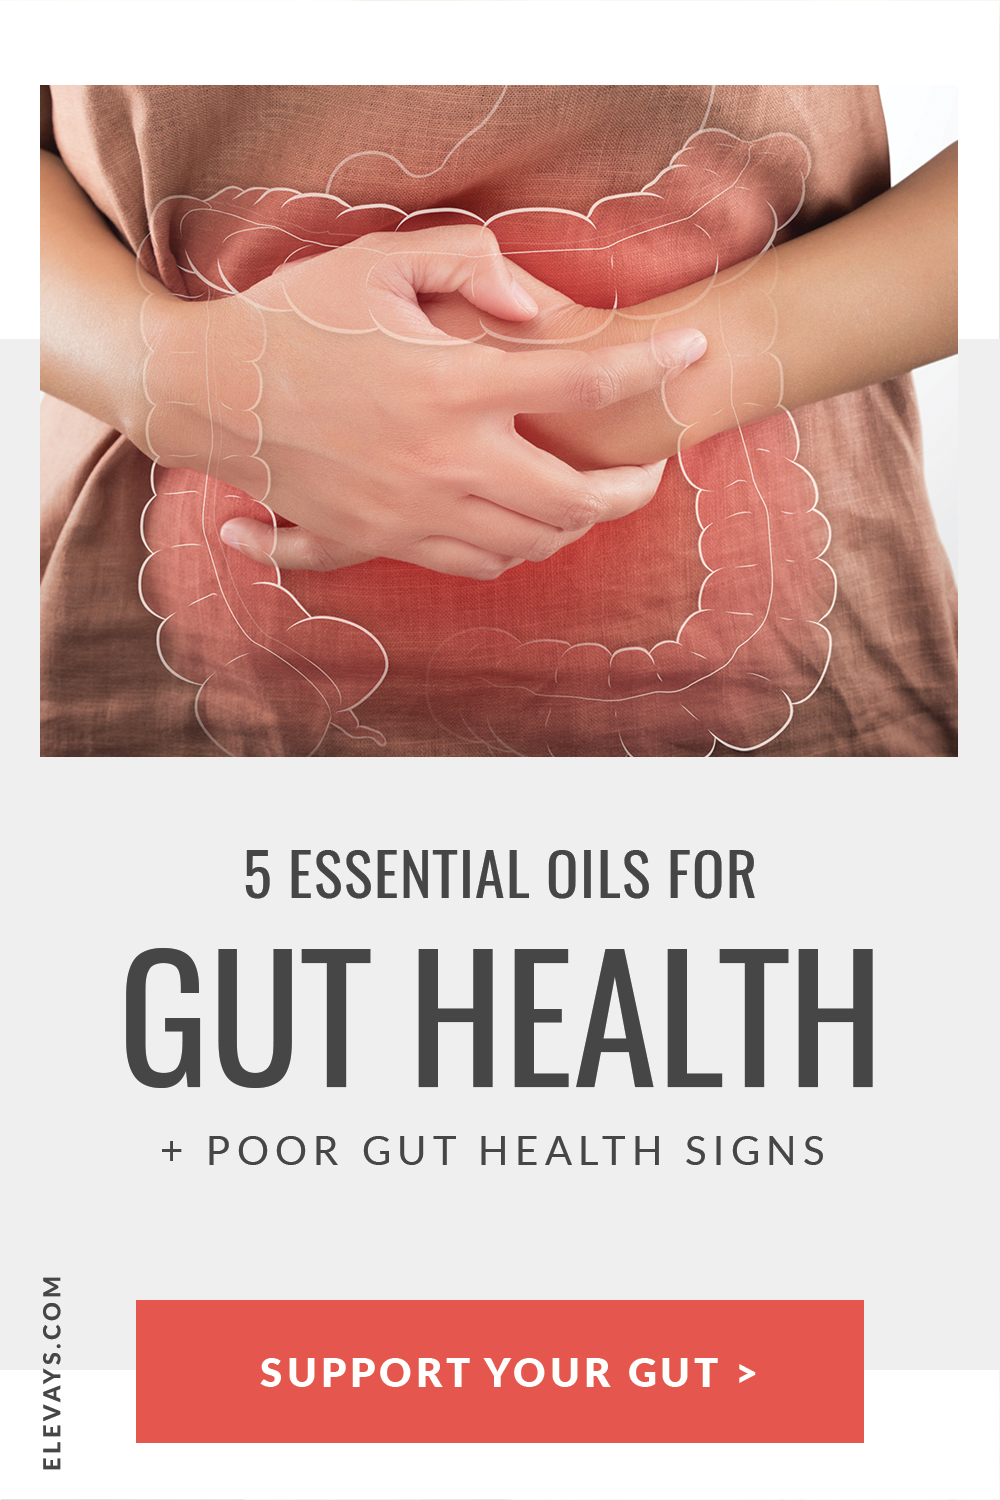 5 Essential Oils for Gut Health + Signs of Poor Gut Health